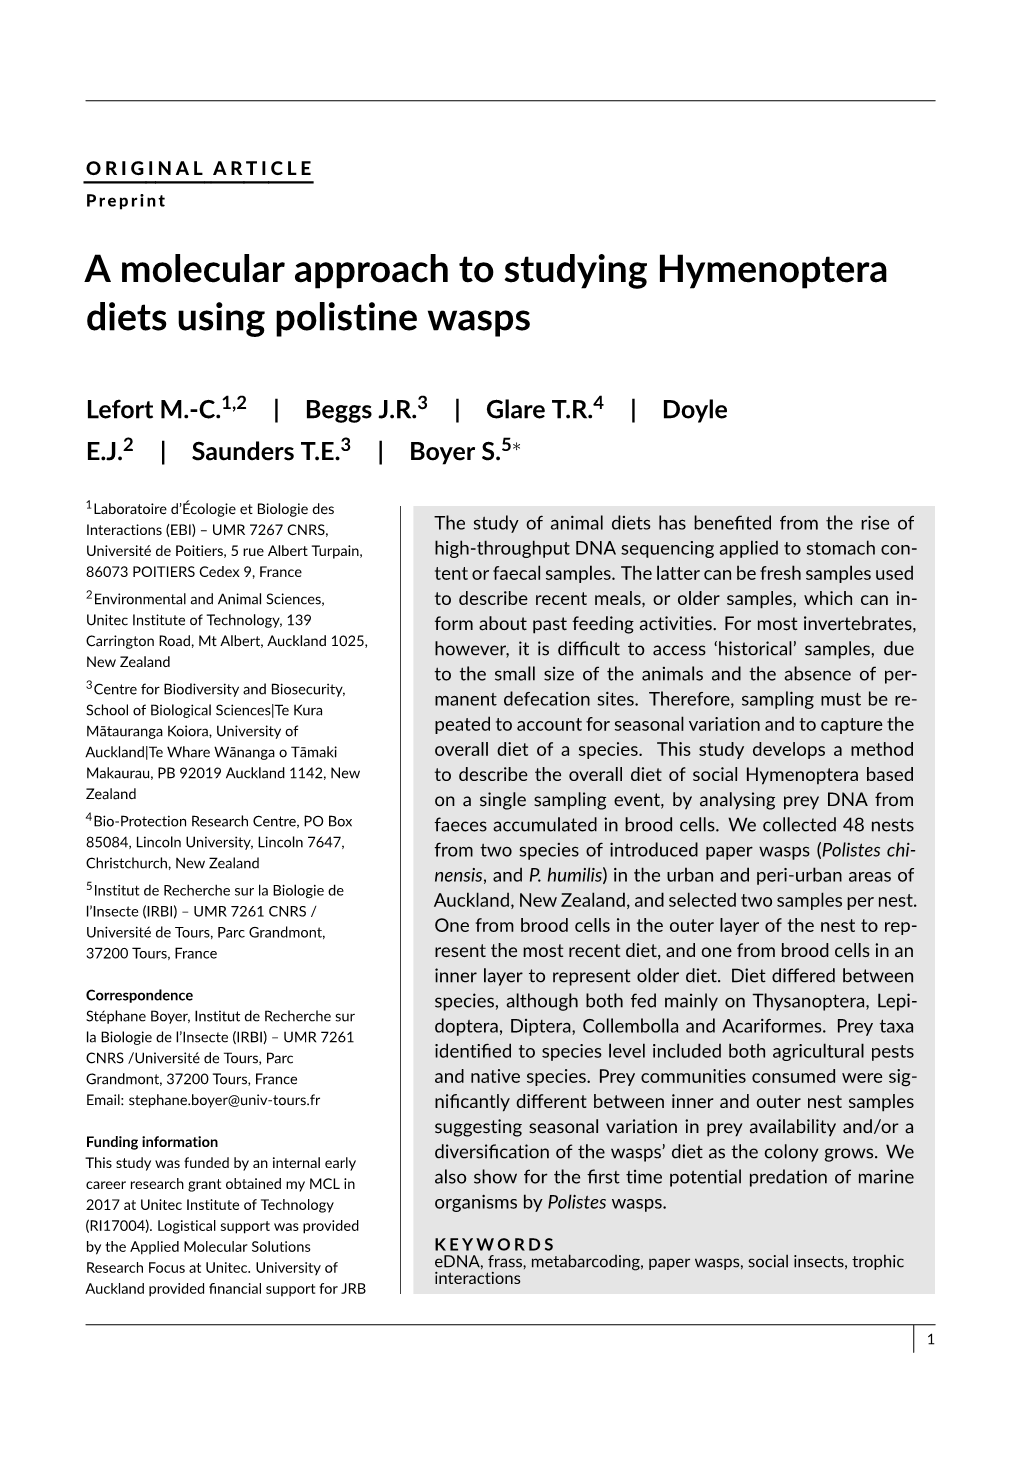 A Molecular Approach to Studying Hymenoptera Diets Using Polistine Wasps